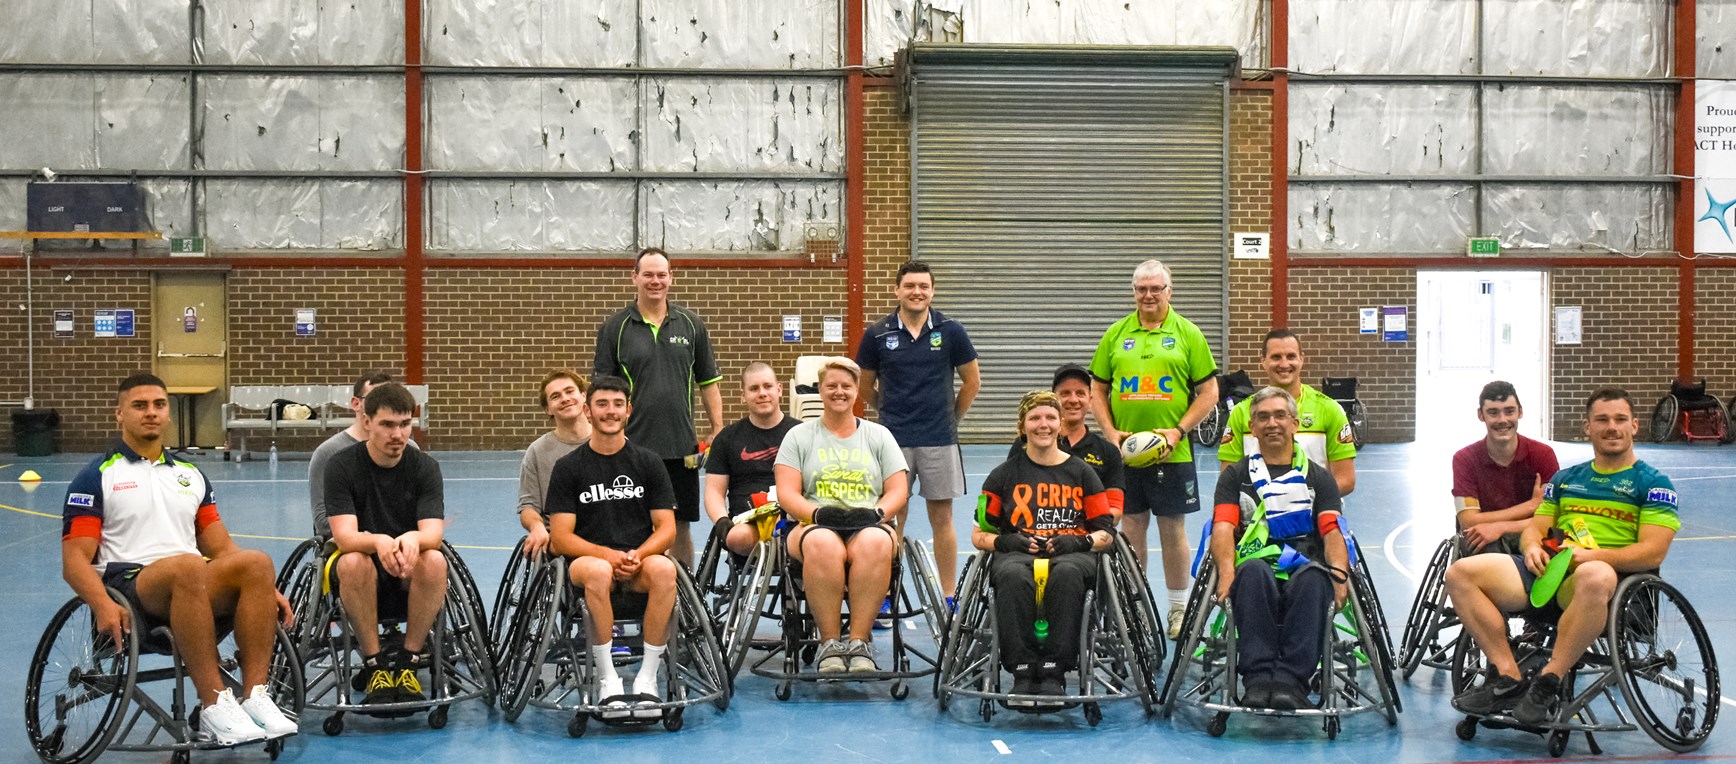 Gallery: Wheelchair Rugby League Come & Try Day